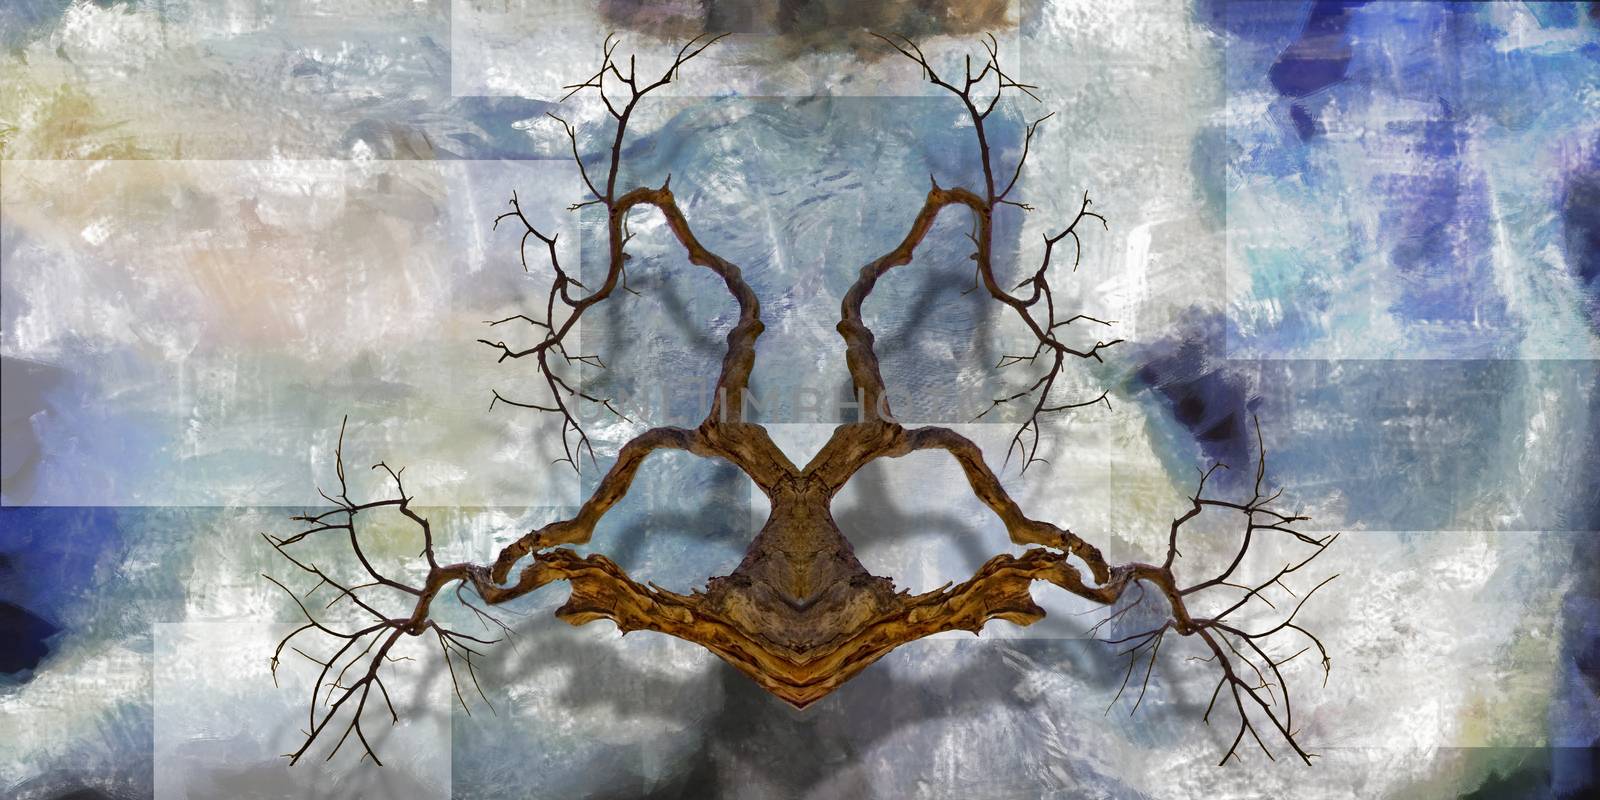 Surreal tree branches by applesstock